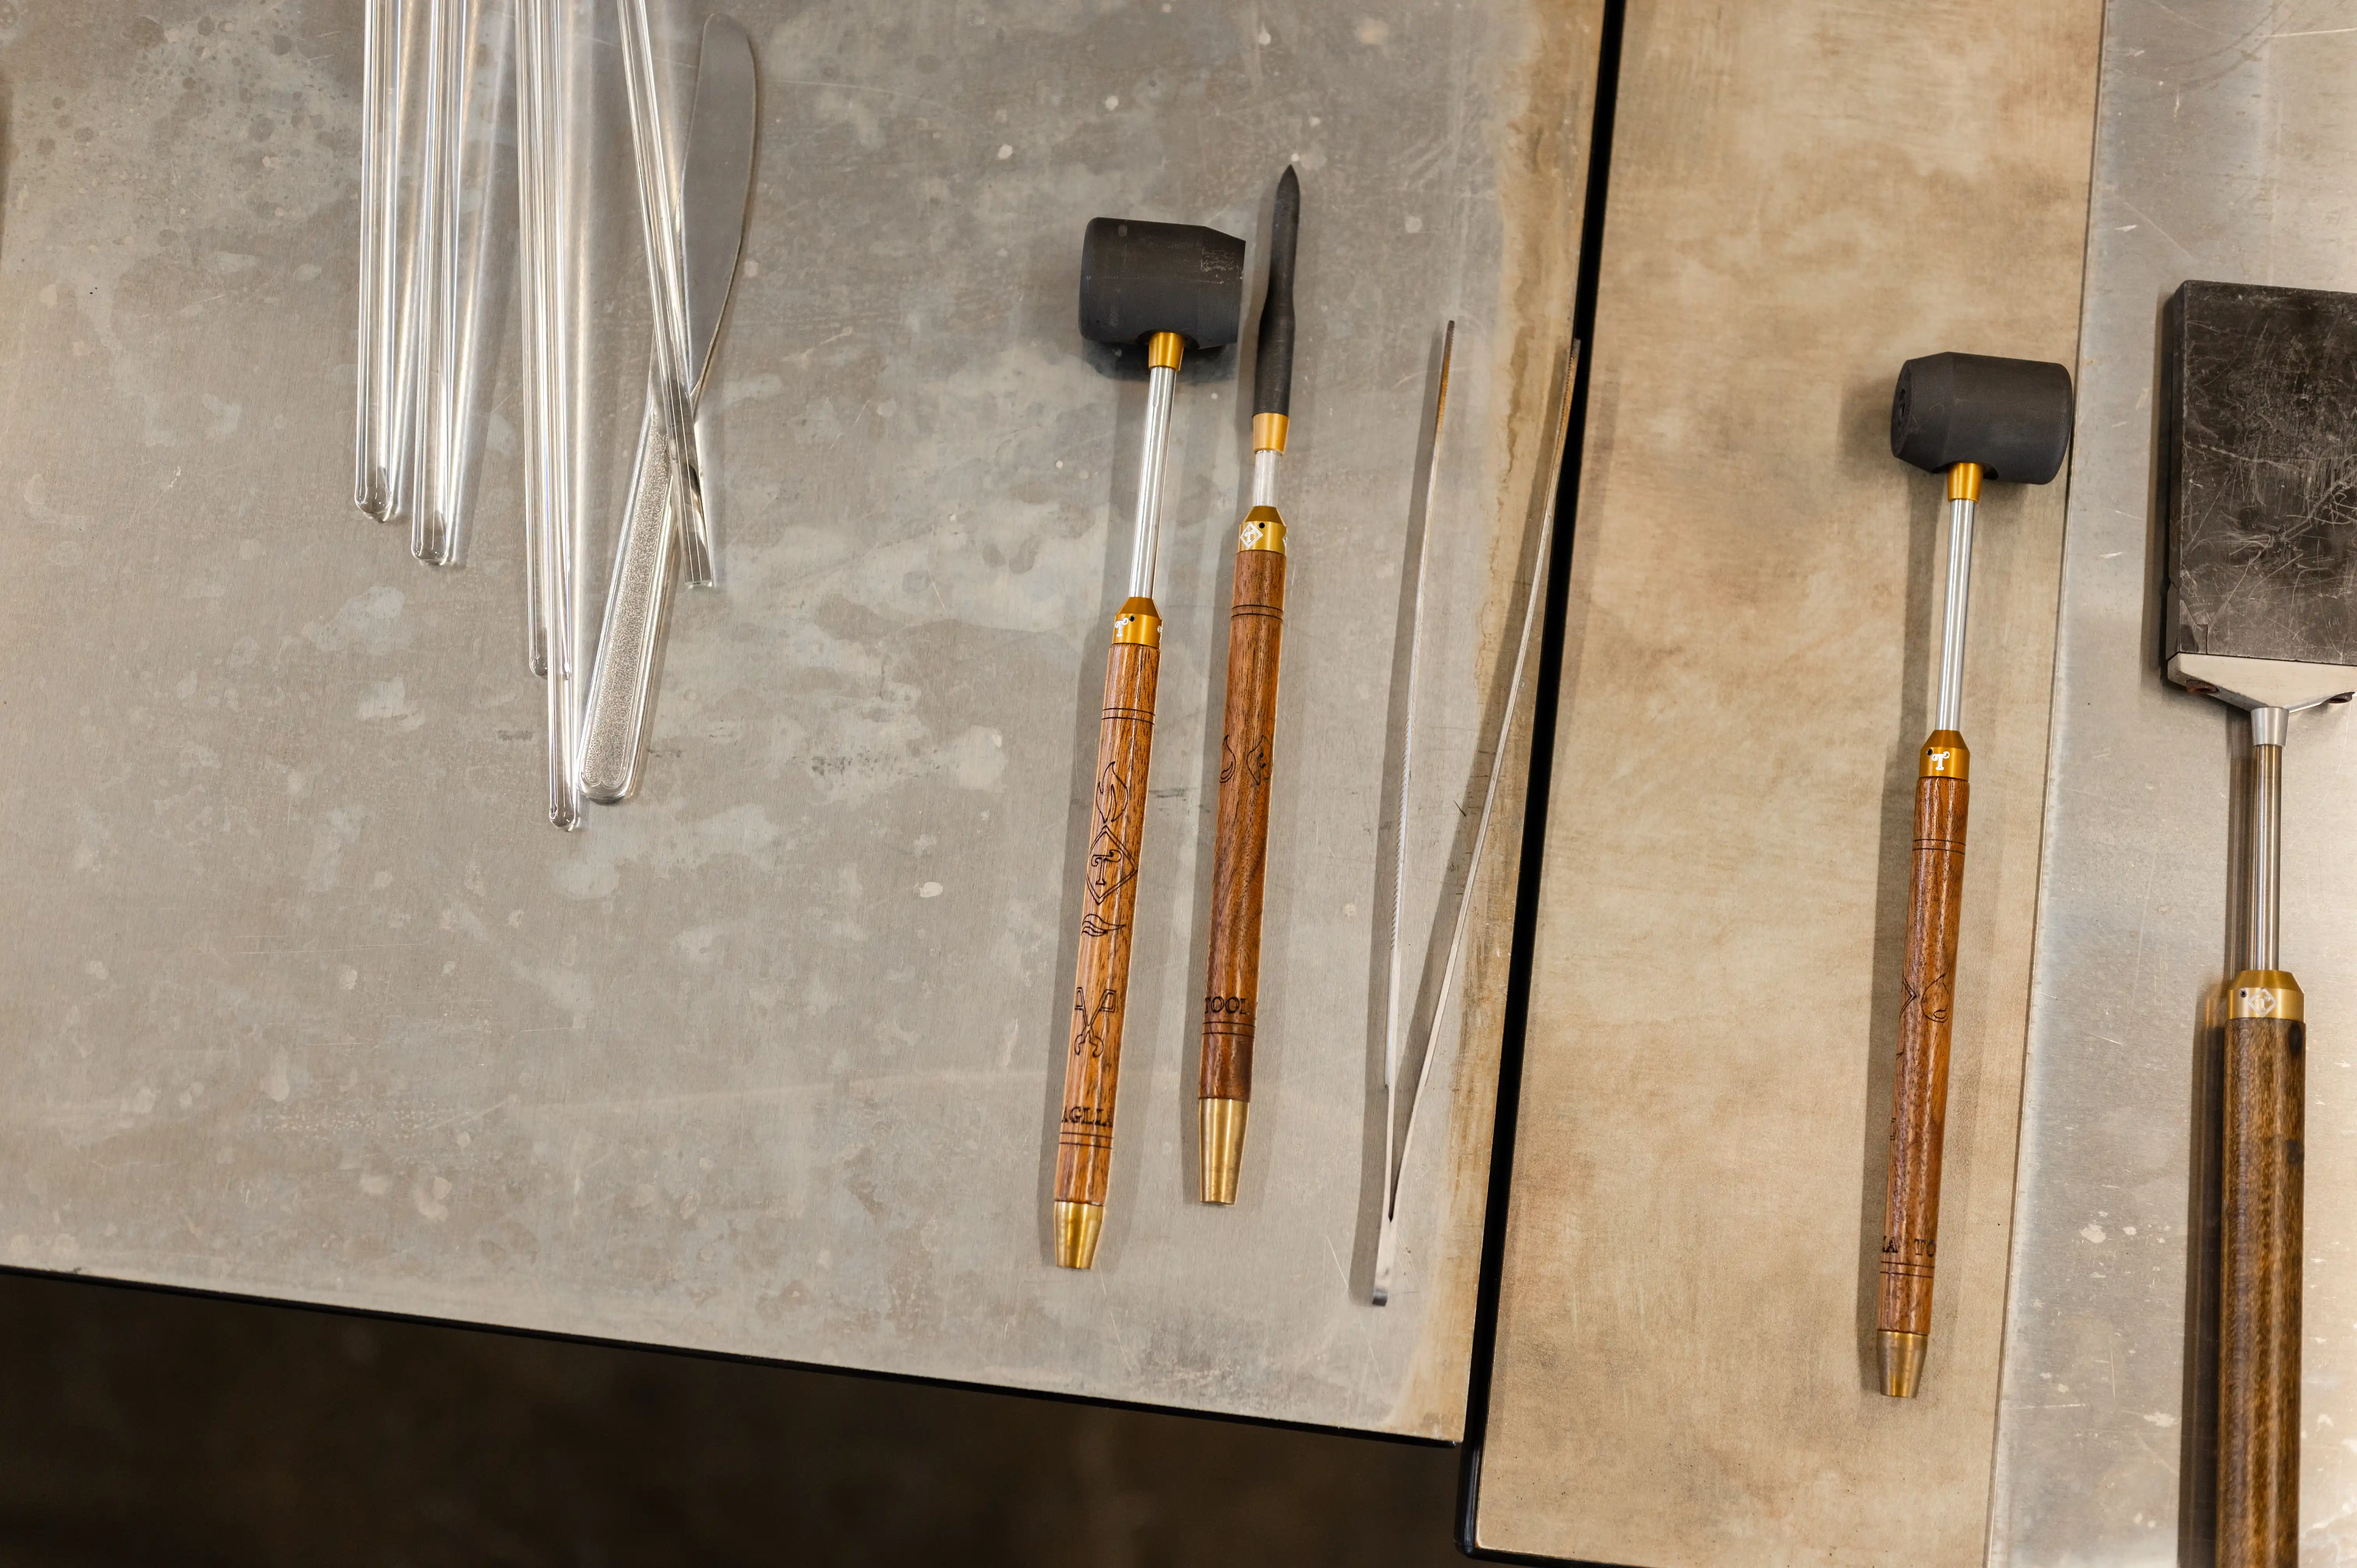 A collection of glassblowing tools including tweezers, jacks, and paddles organized on a steel workbench.